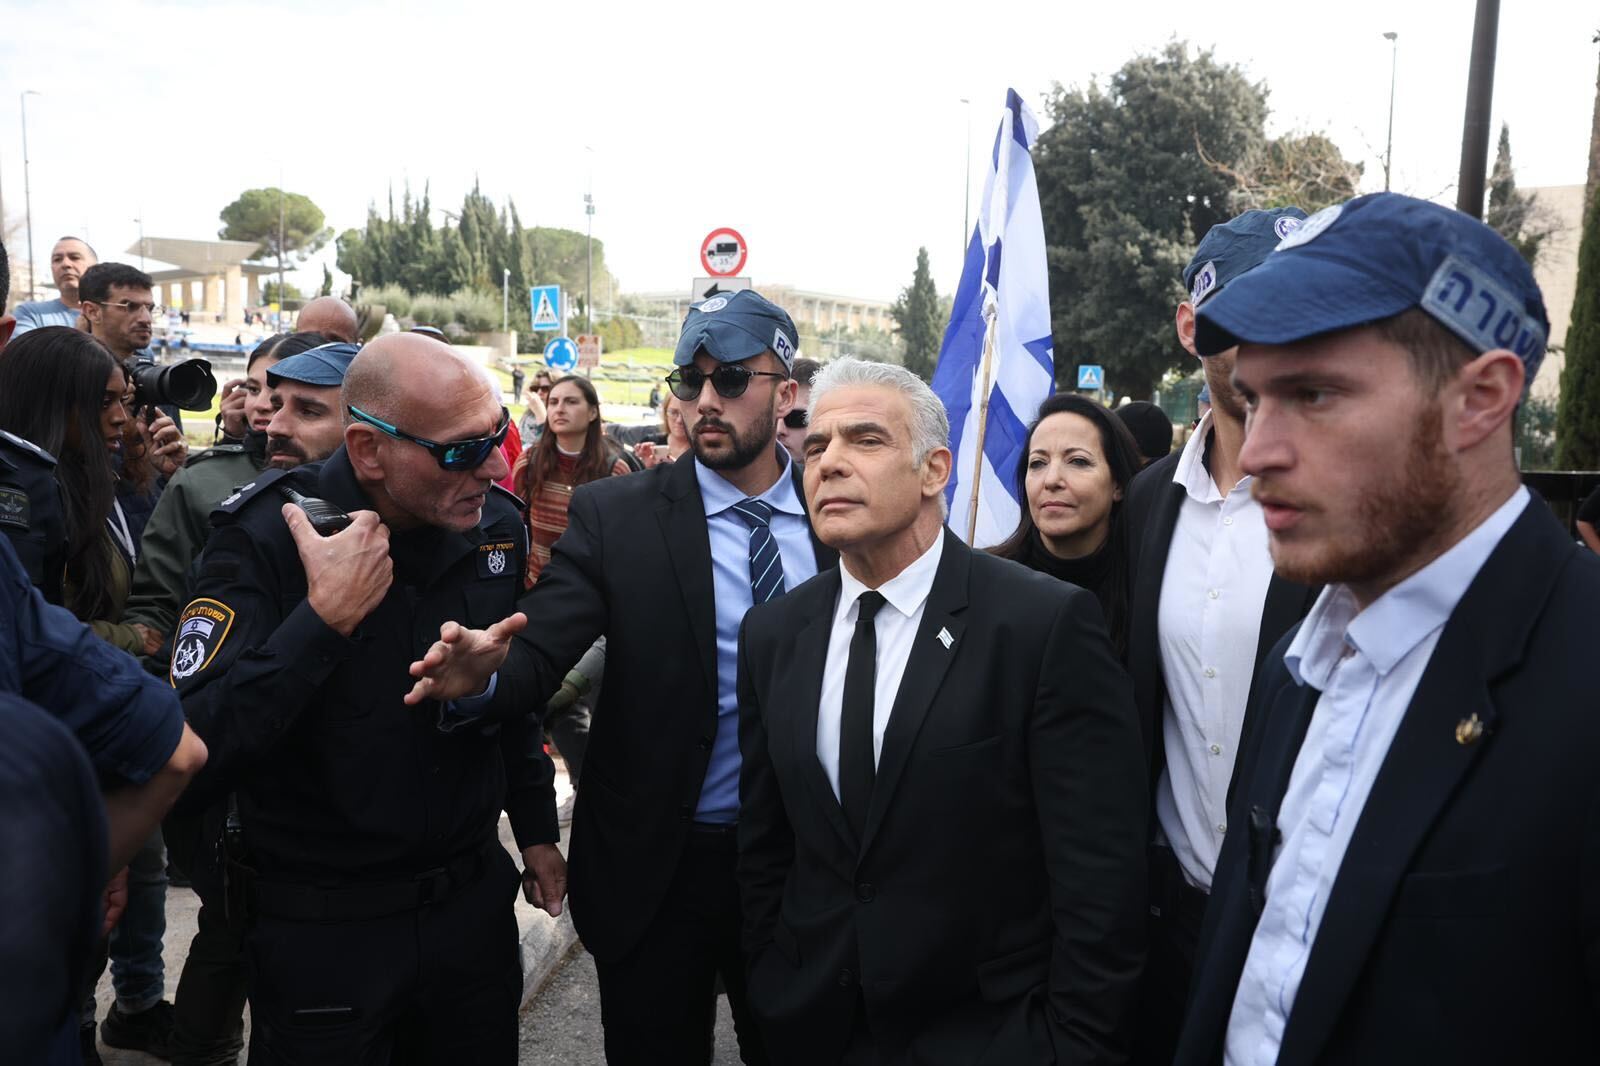 Opposition leader Yair Lapid at the Knesset protest in Jerusalem on 13 February, 2023 (MEE)